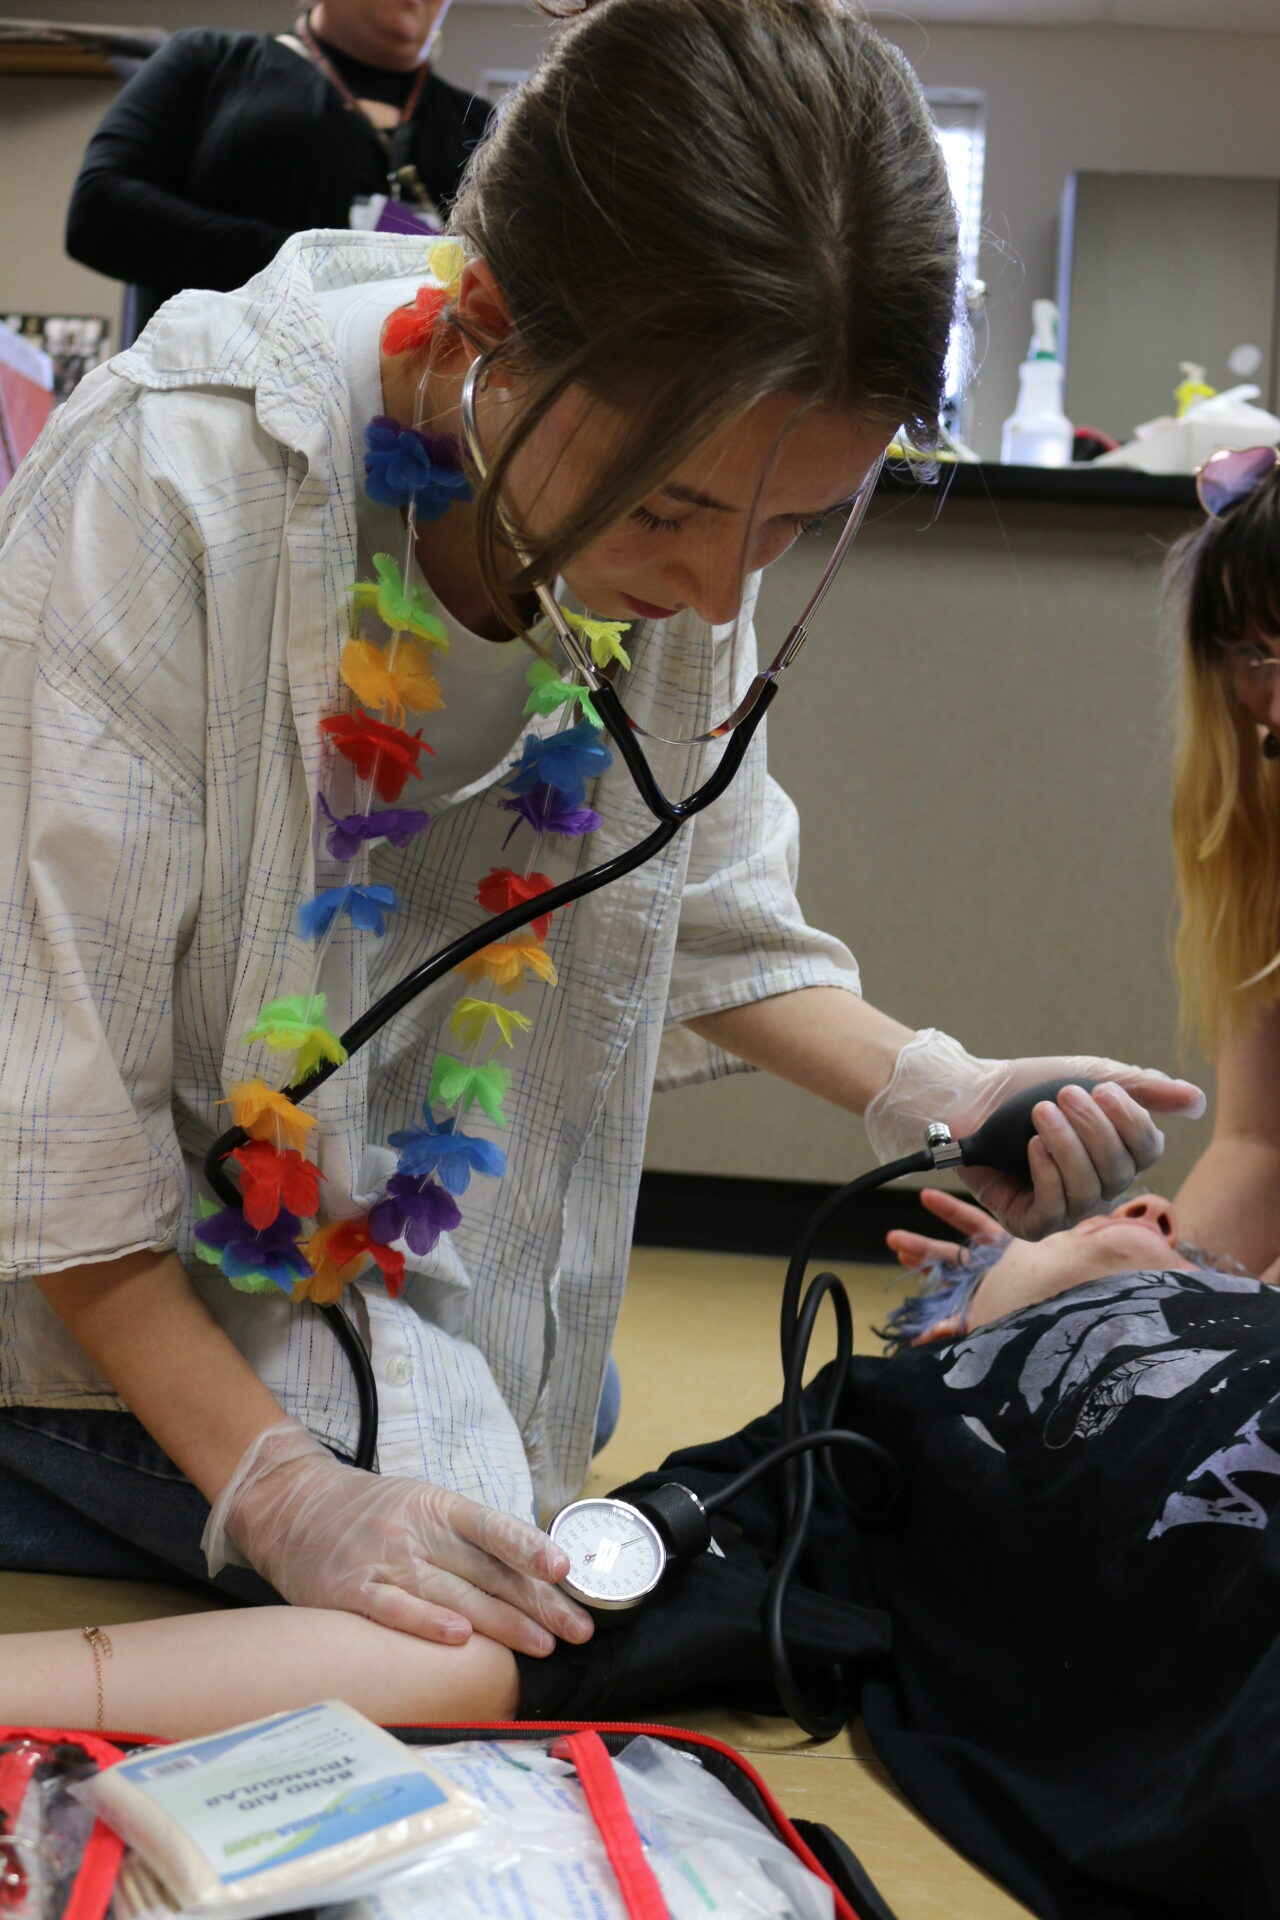 Student practices using a stethoscope and Automated External Defibrillator (AED) in Sports Medicine class at Washougal High School. This was one stop on the AASA site tour at Washougal High School.